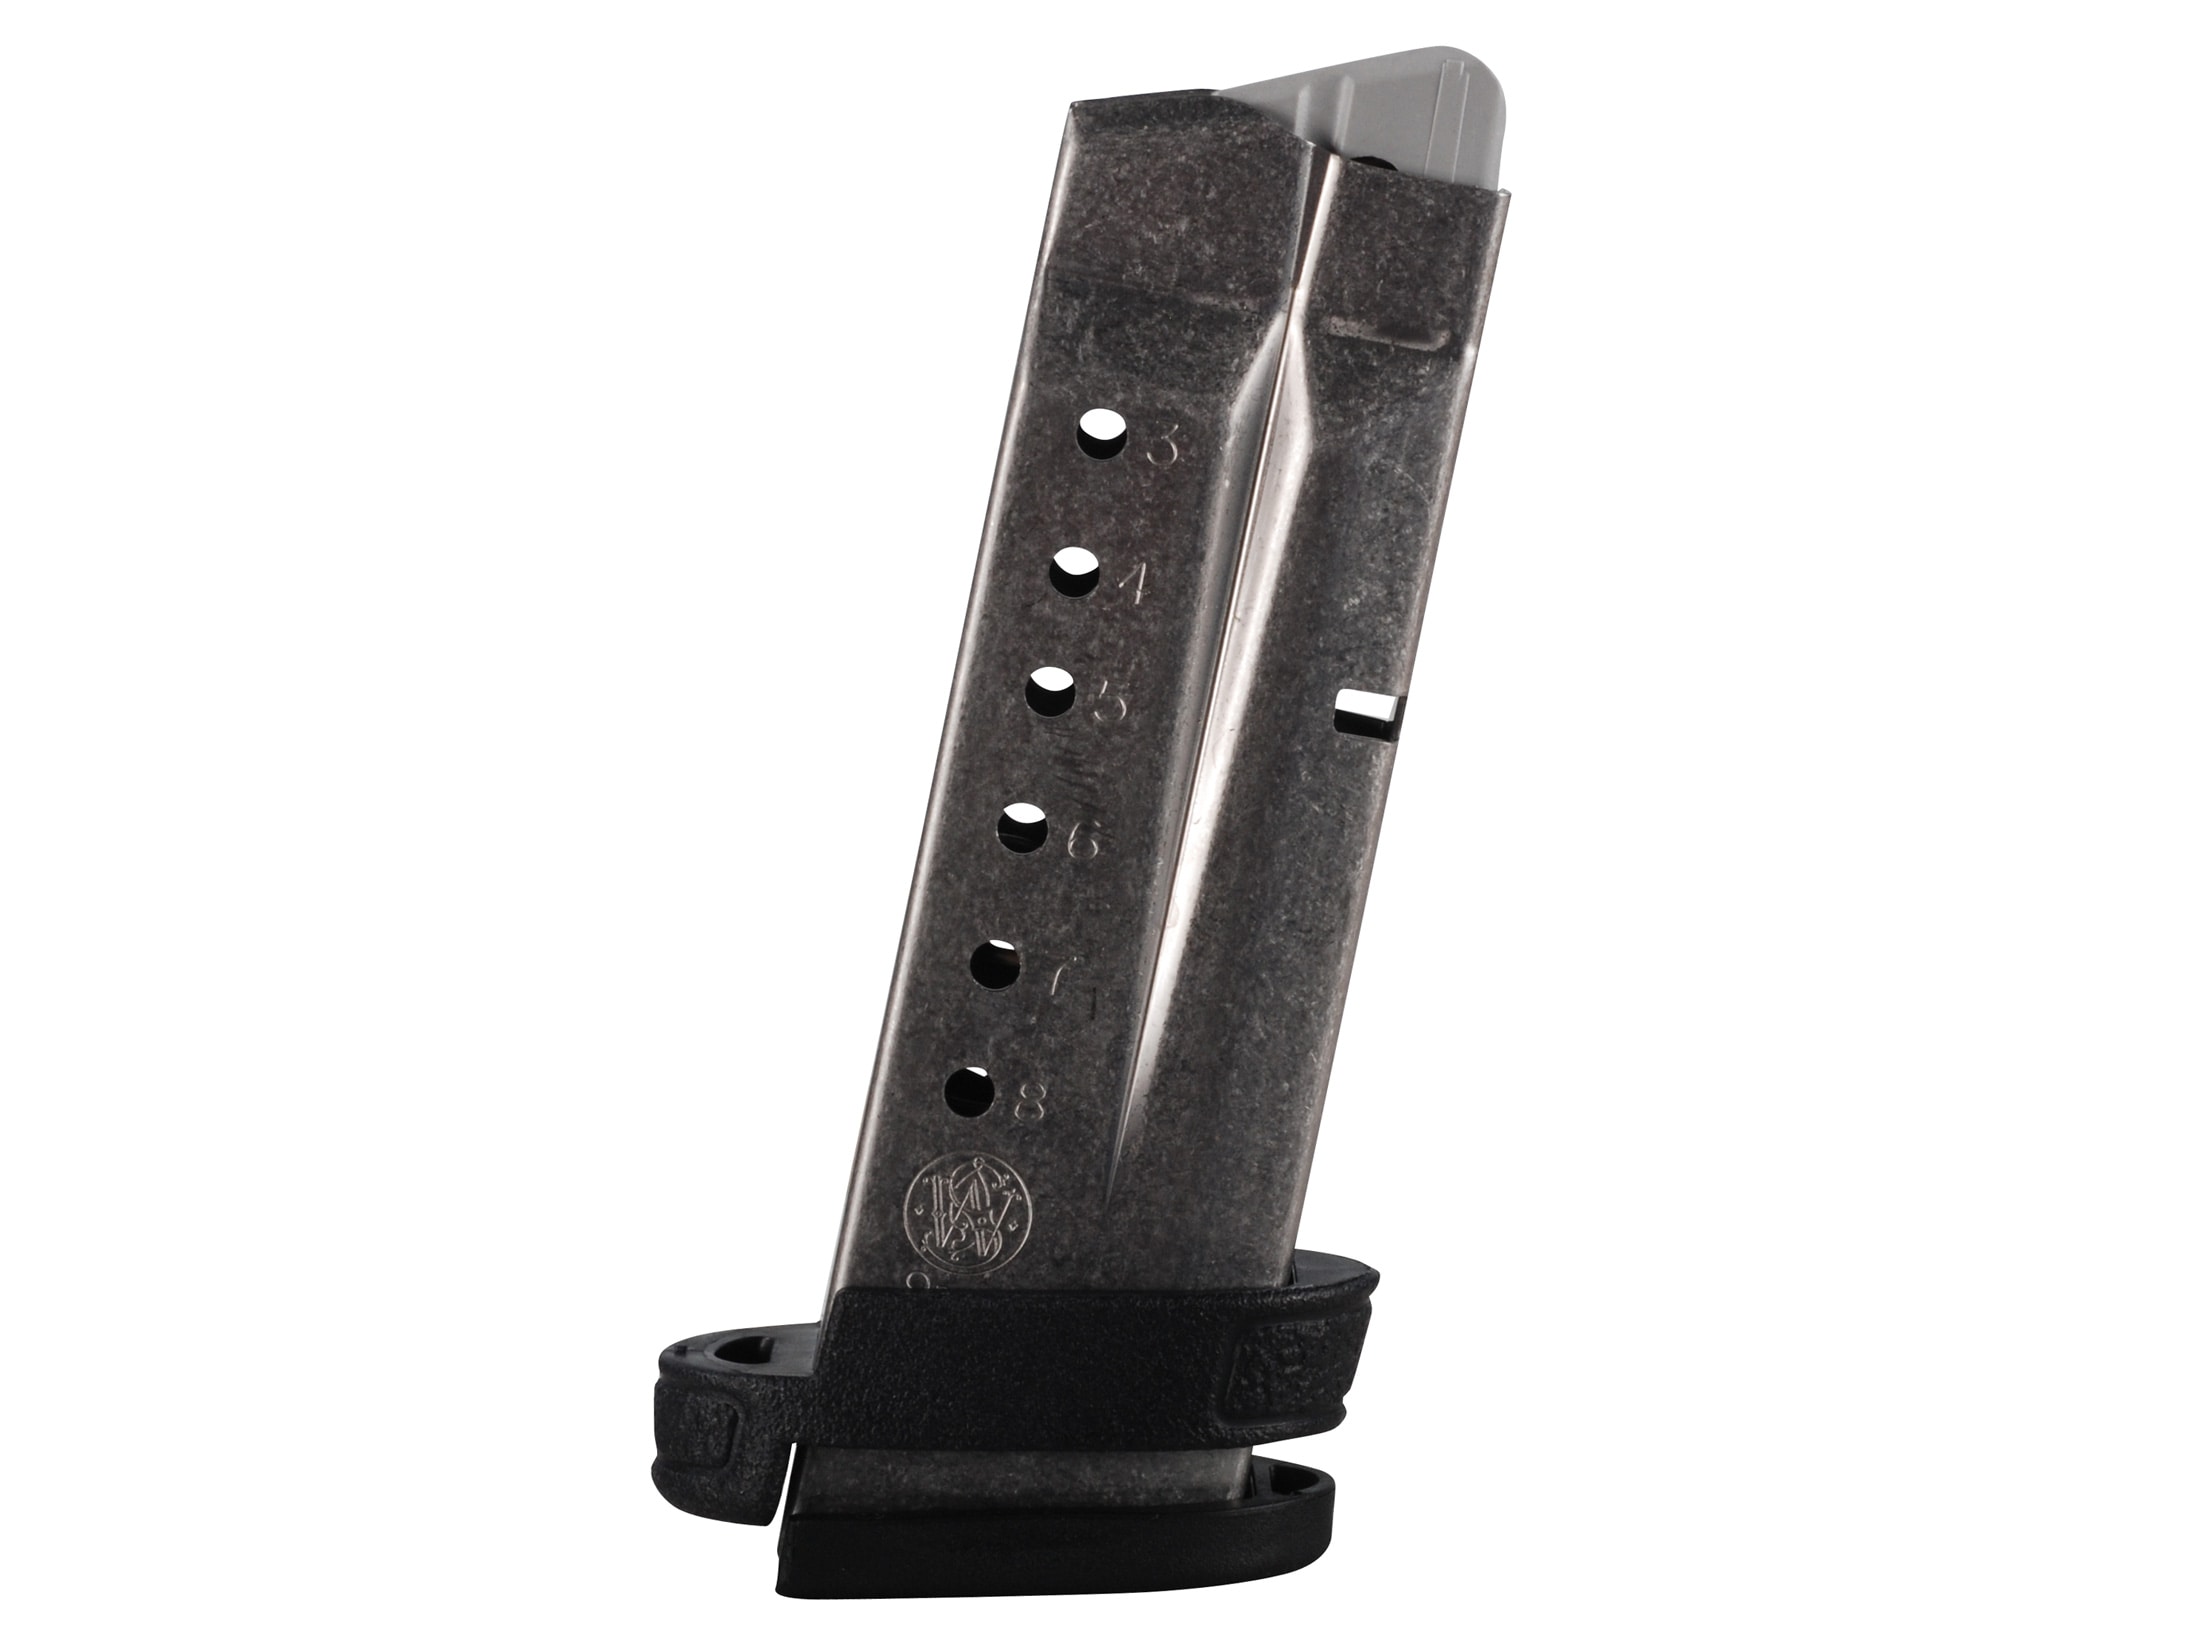 7 OR 8 ROUND MAGS Double Magazine Pouch for M&P Shield 9mm or 40 Caliber 